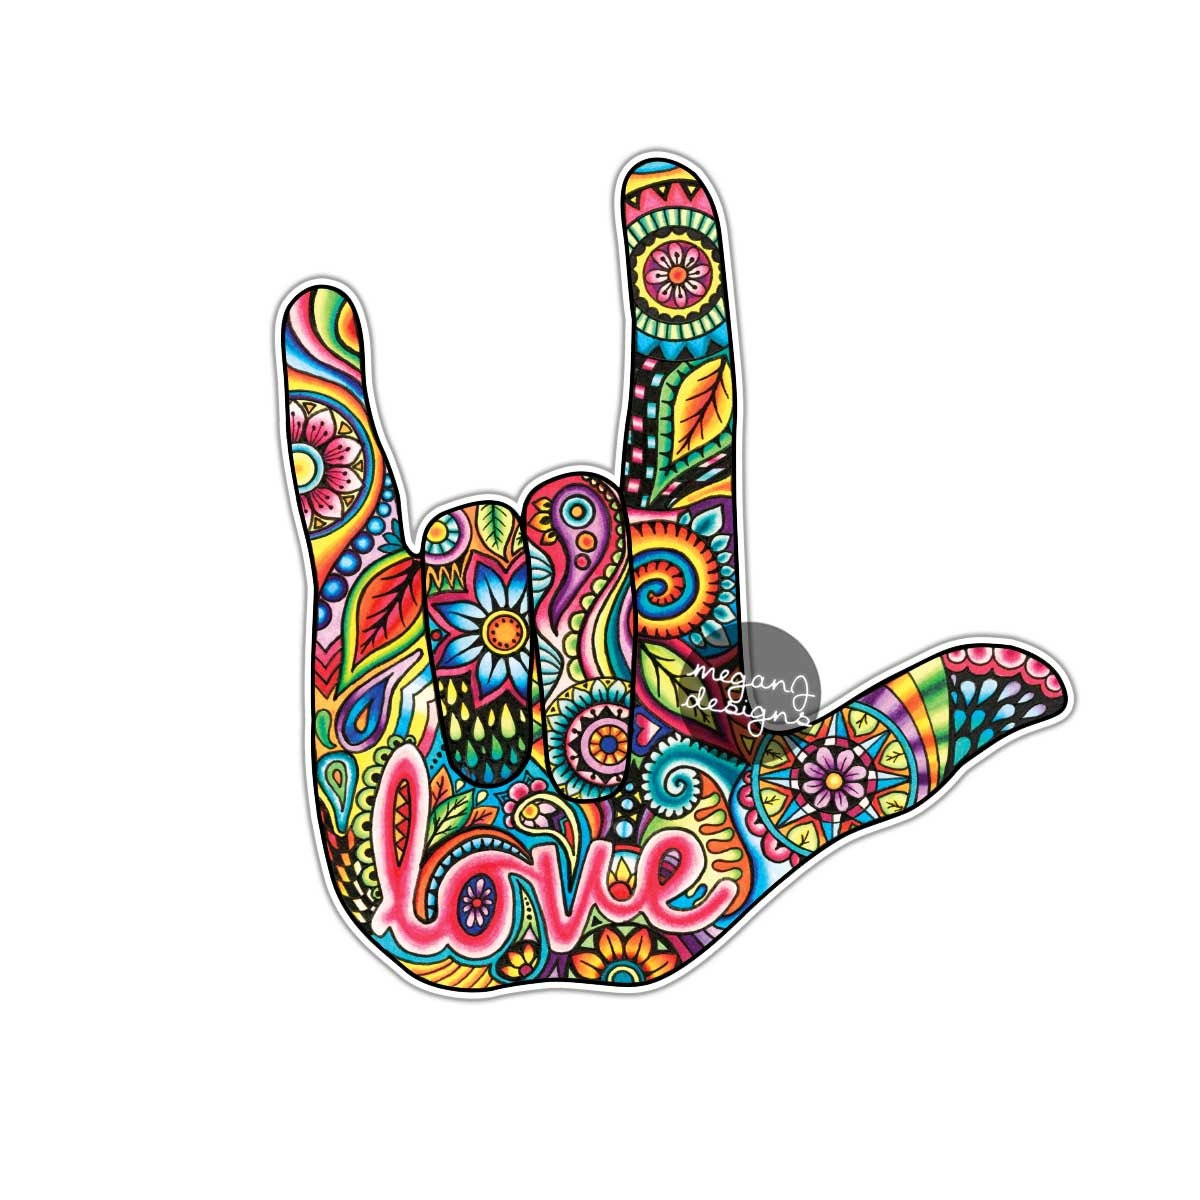 Hand Gesture Decal